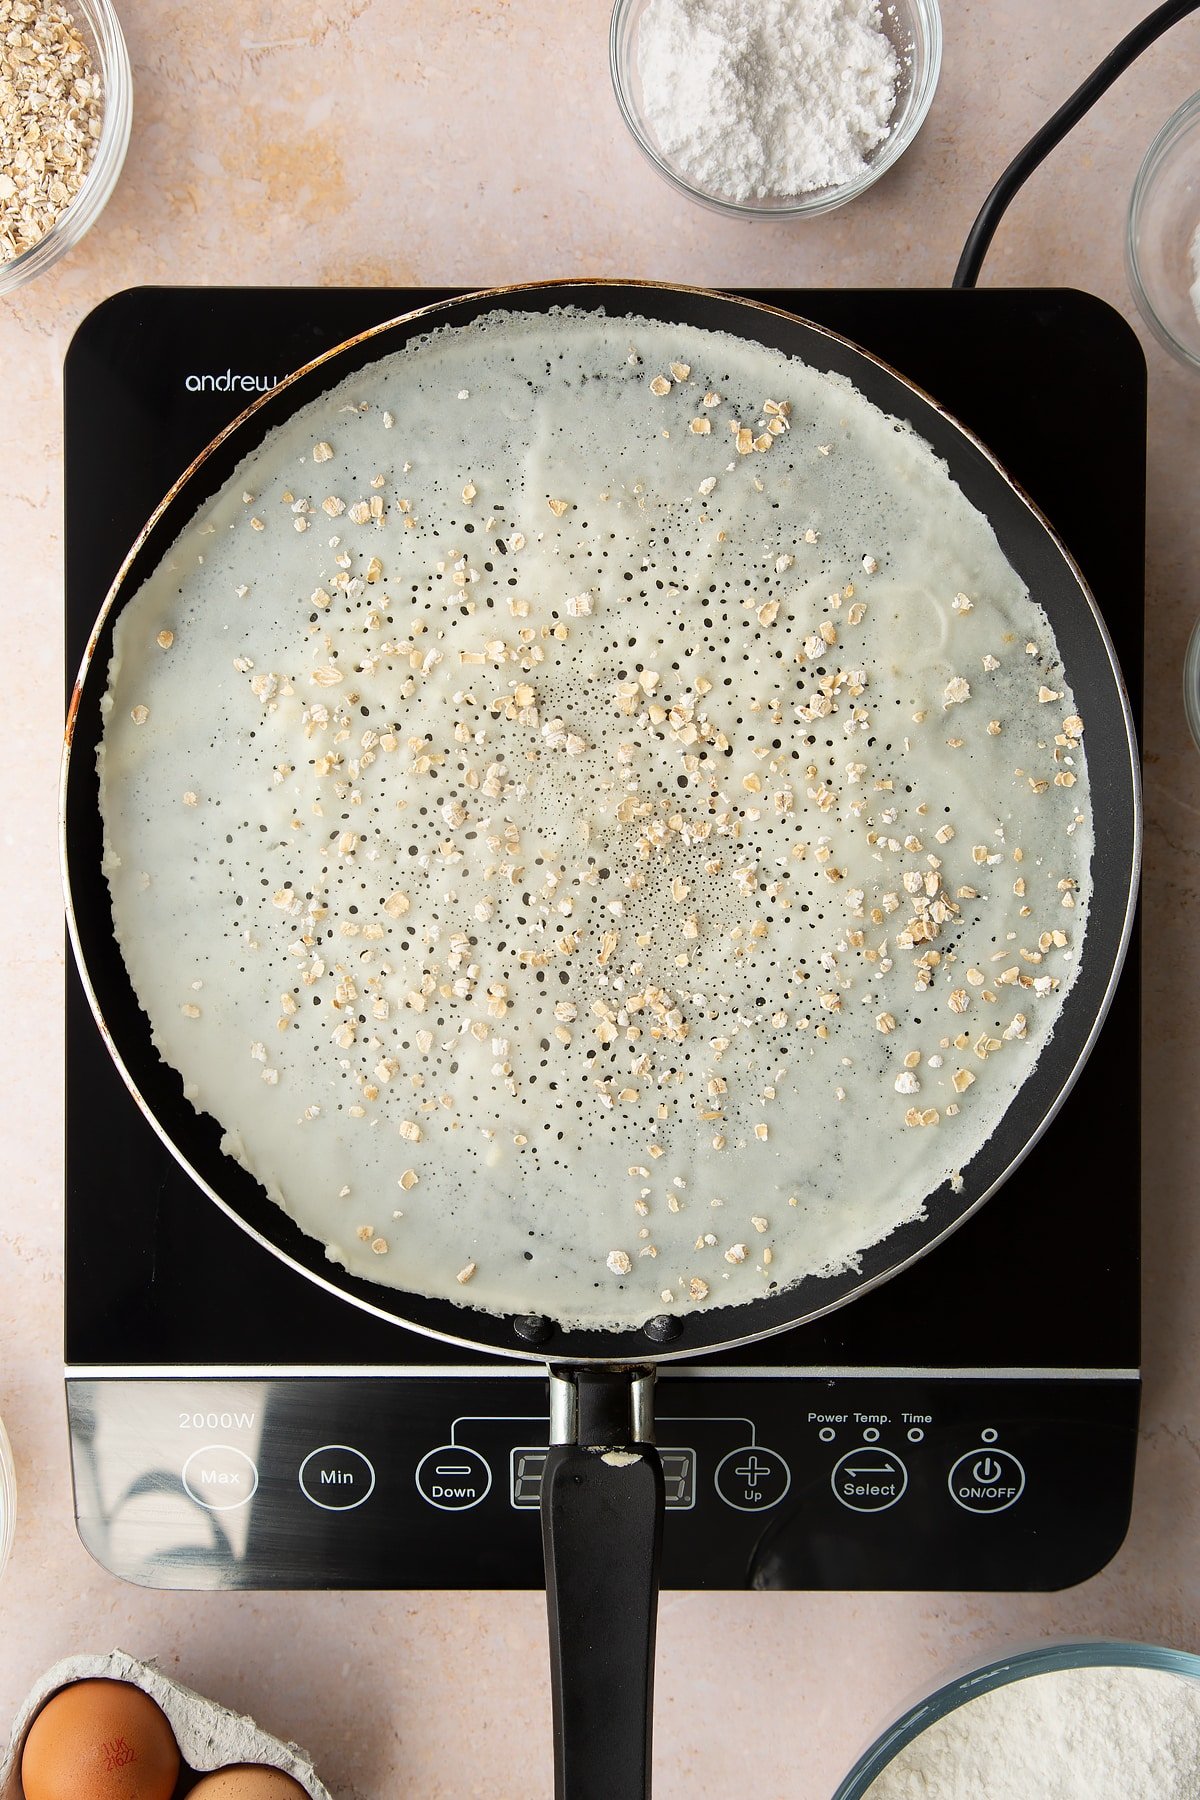 A thin layer of batter cooking in a crepe pan with oats sprinkled on top. Ingredients to make gluten free crepes surround the bowl.